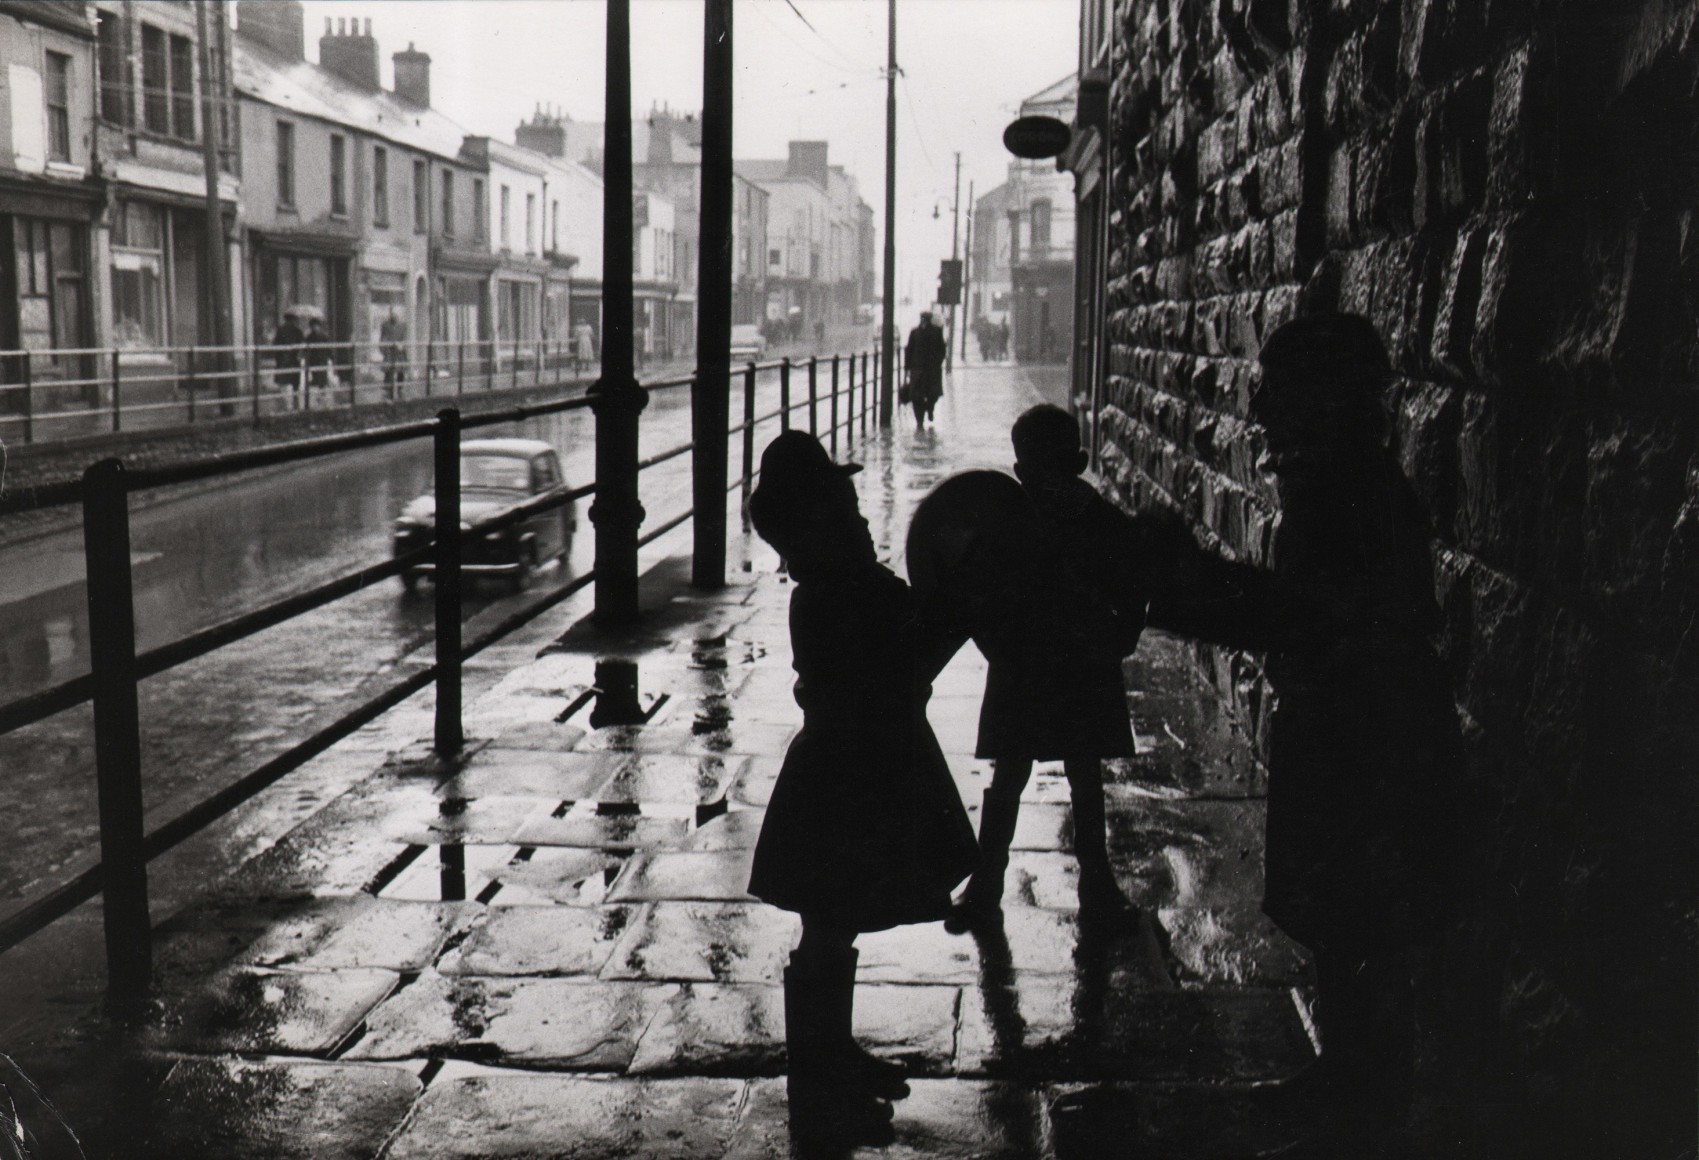 16. Patrick Ward, Street in the Tiger Bay dockland area of Cardiff, Wales, c. 1961&ndash;1966. Silhouettes of three children in the foreground right on a wet cobbled sidewalk.